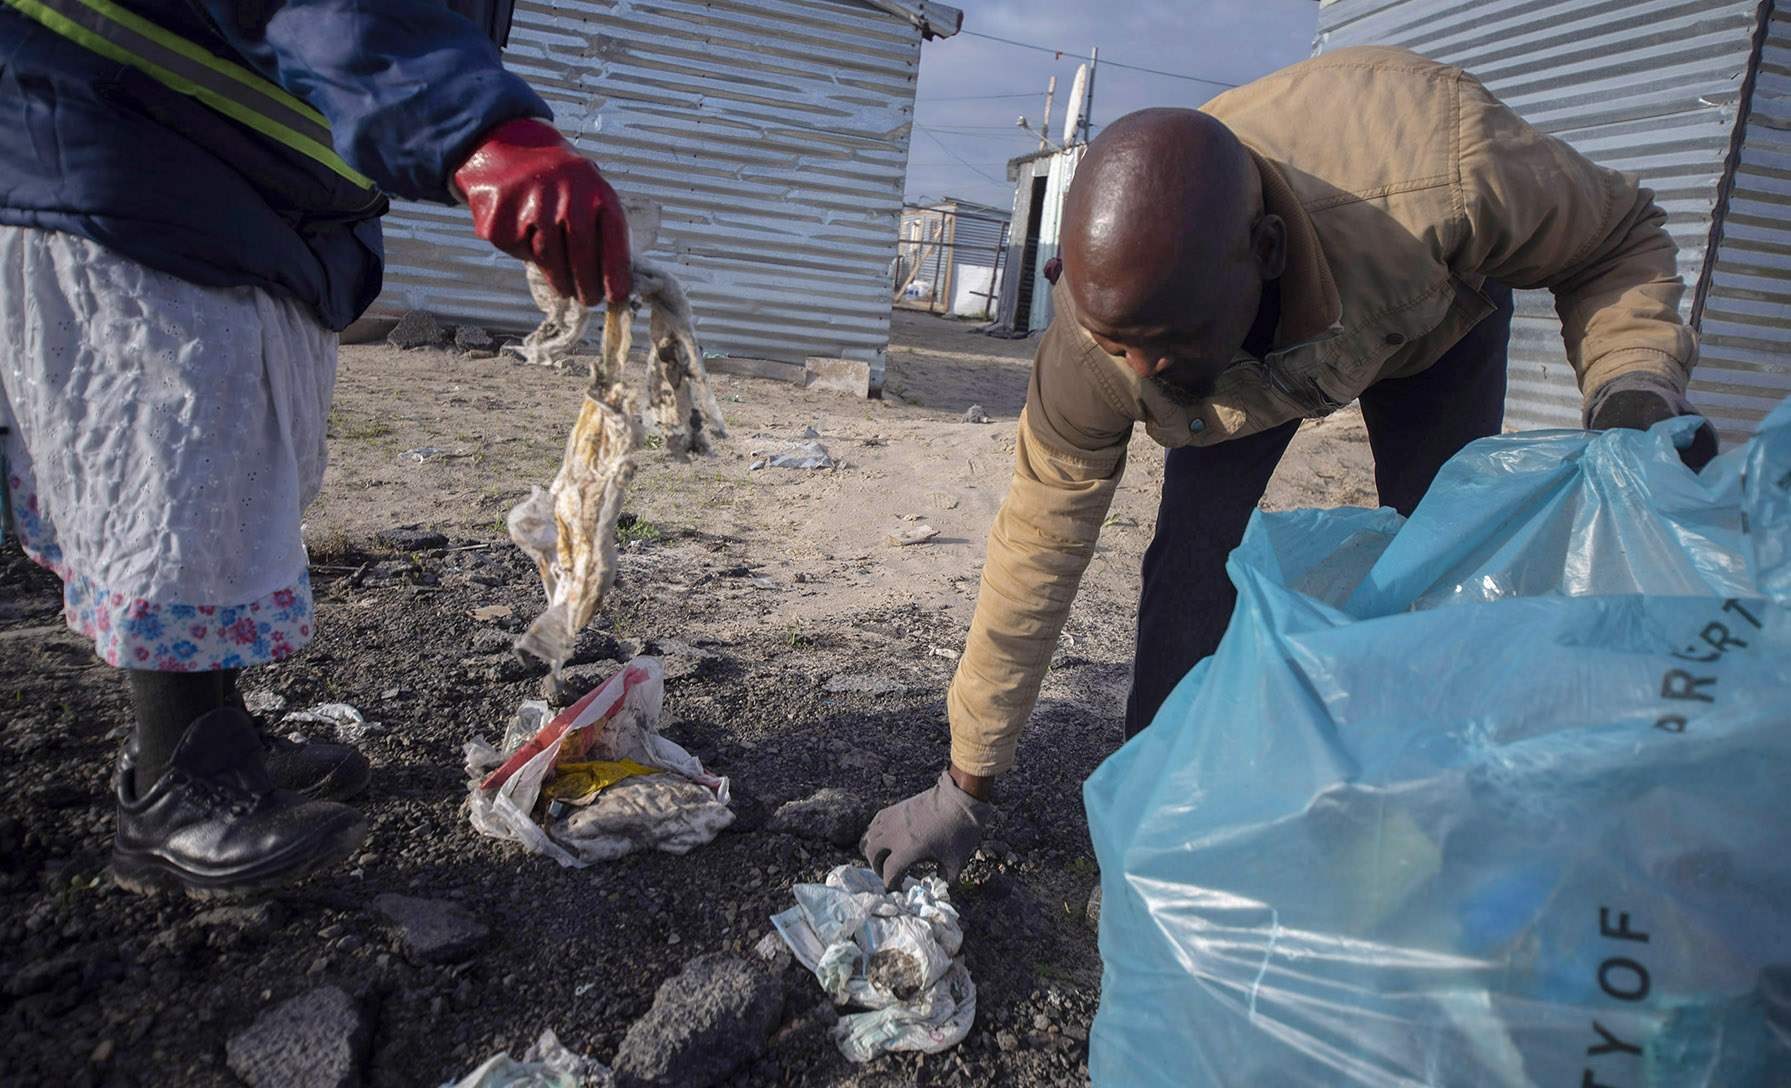 Volunteers collect litter and debris from within the informal settlement